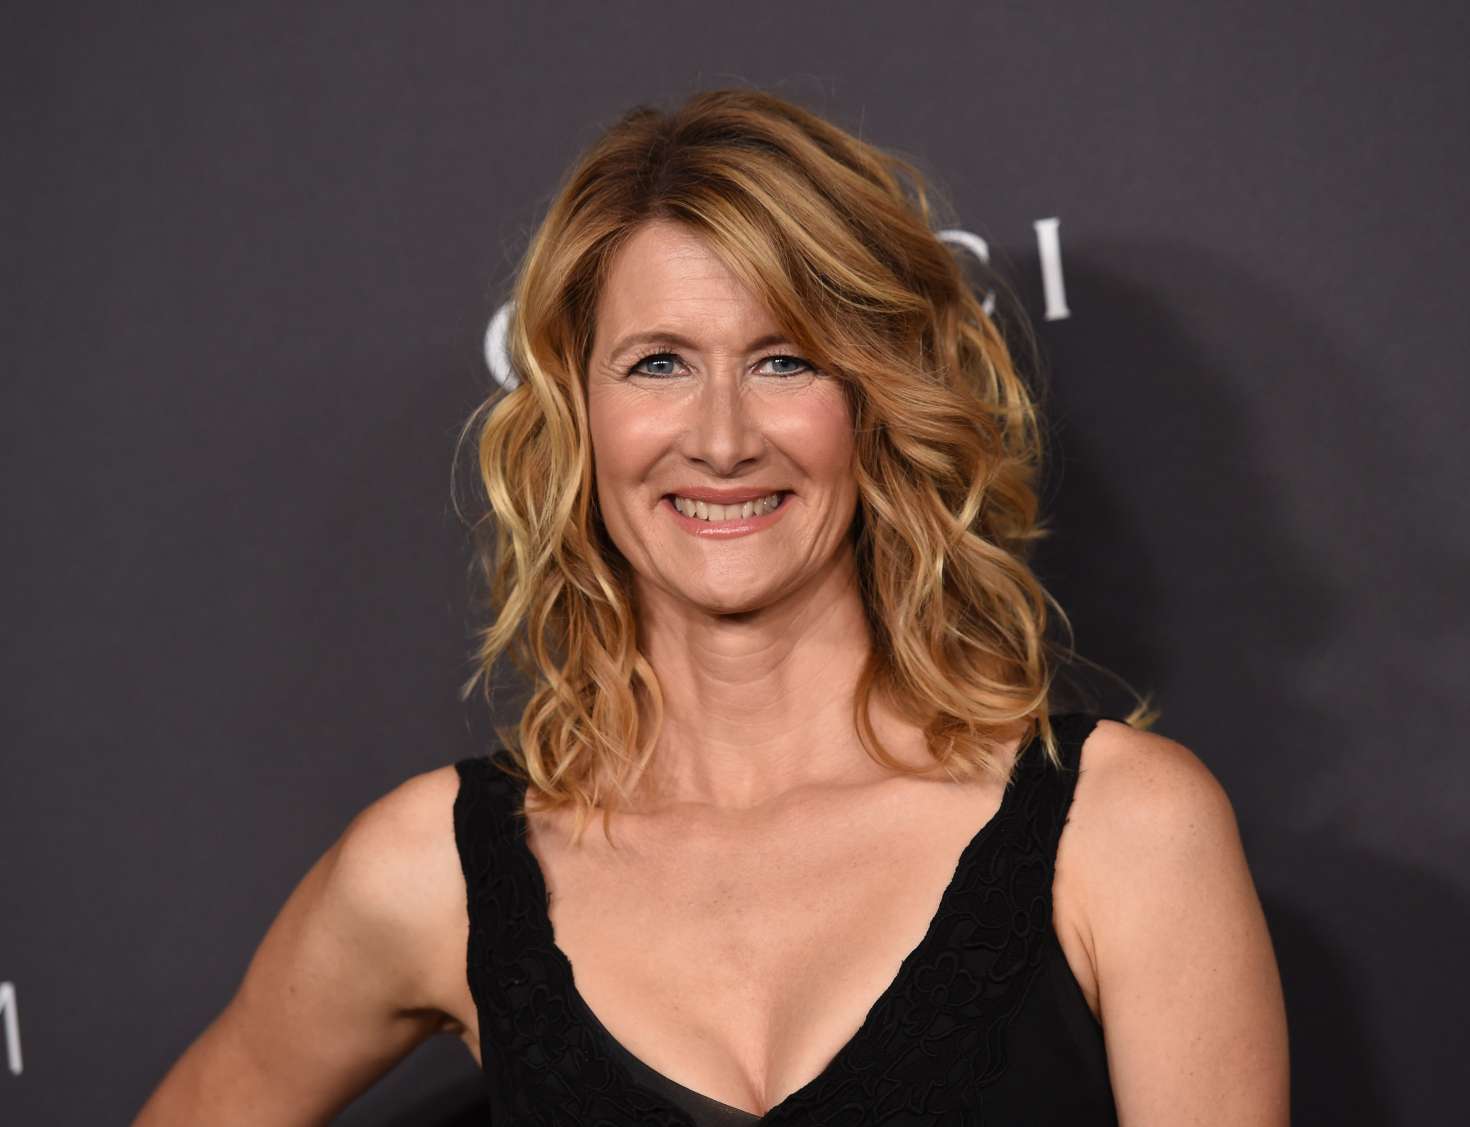 Index of /wp-content/uploads/photos/laura-dern/2016-lacma-art-and-film-gala...